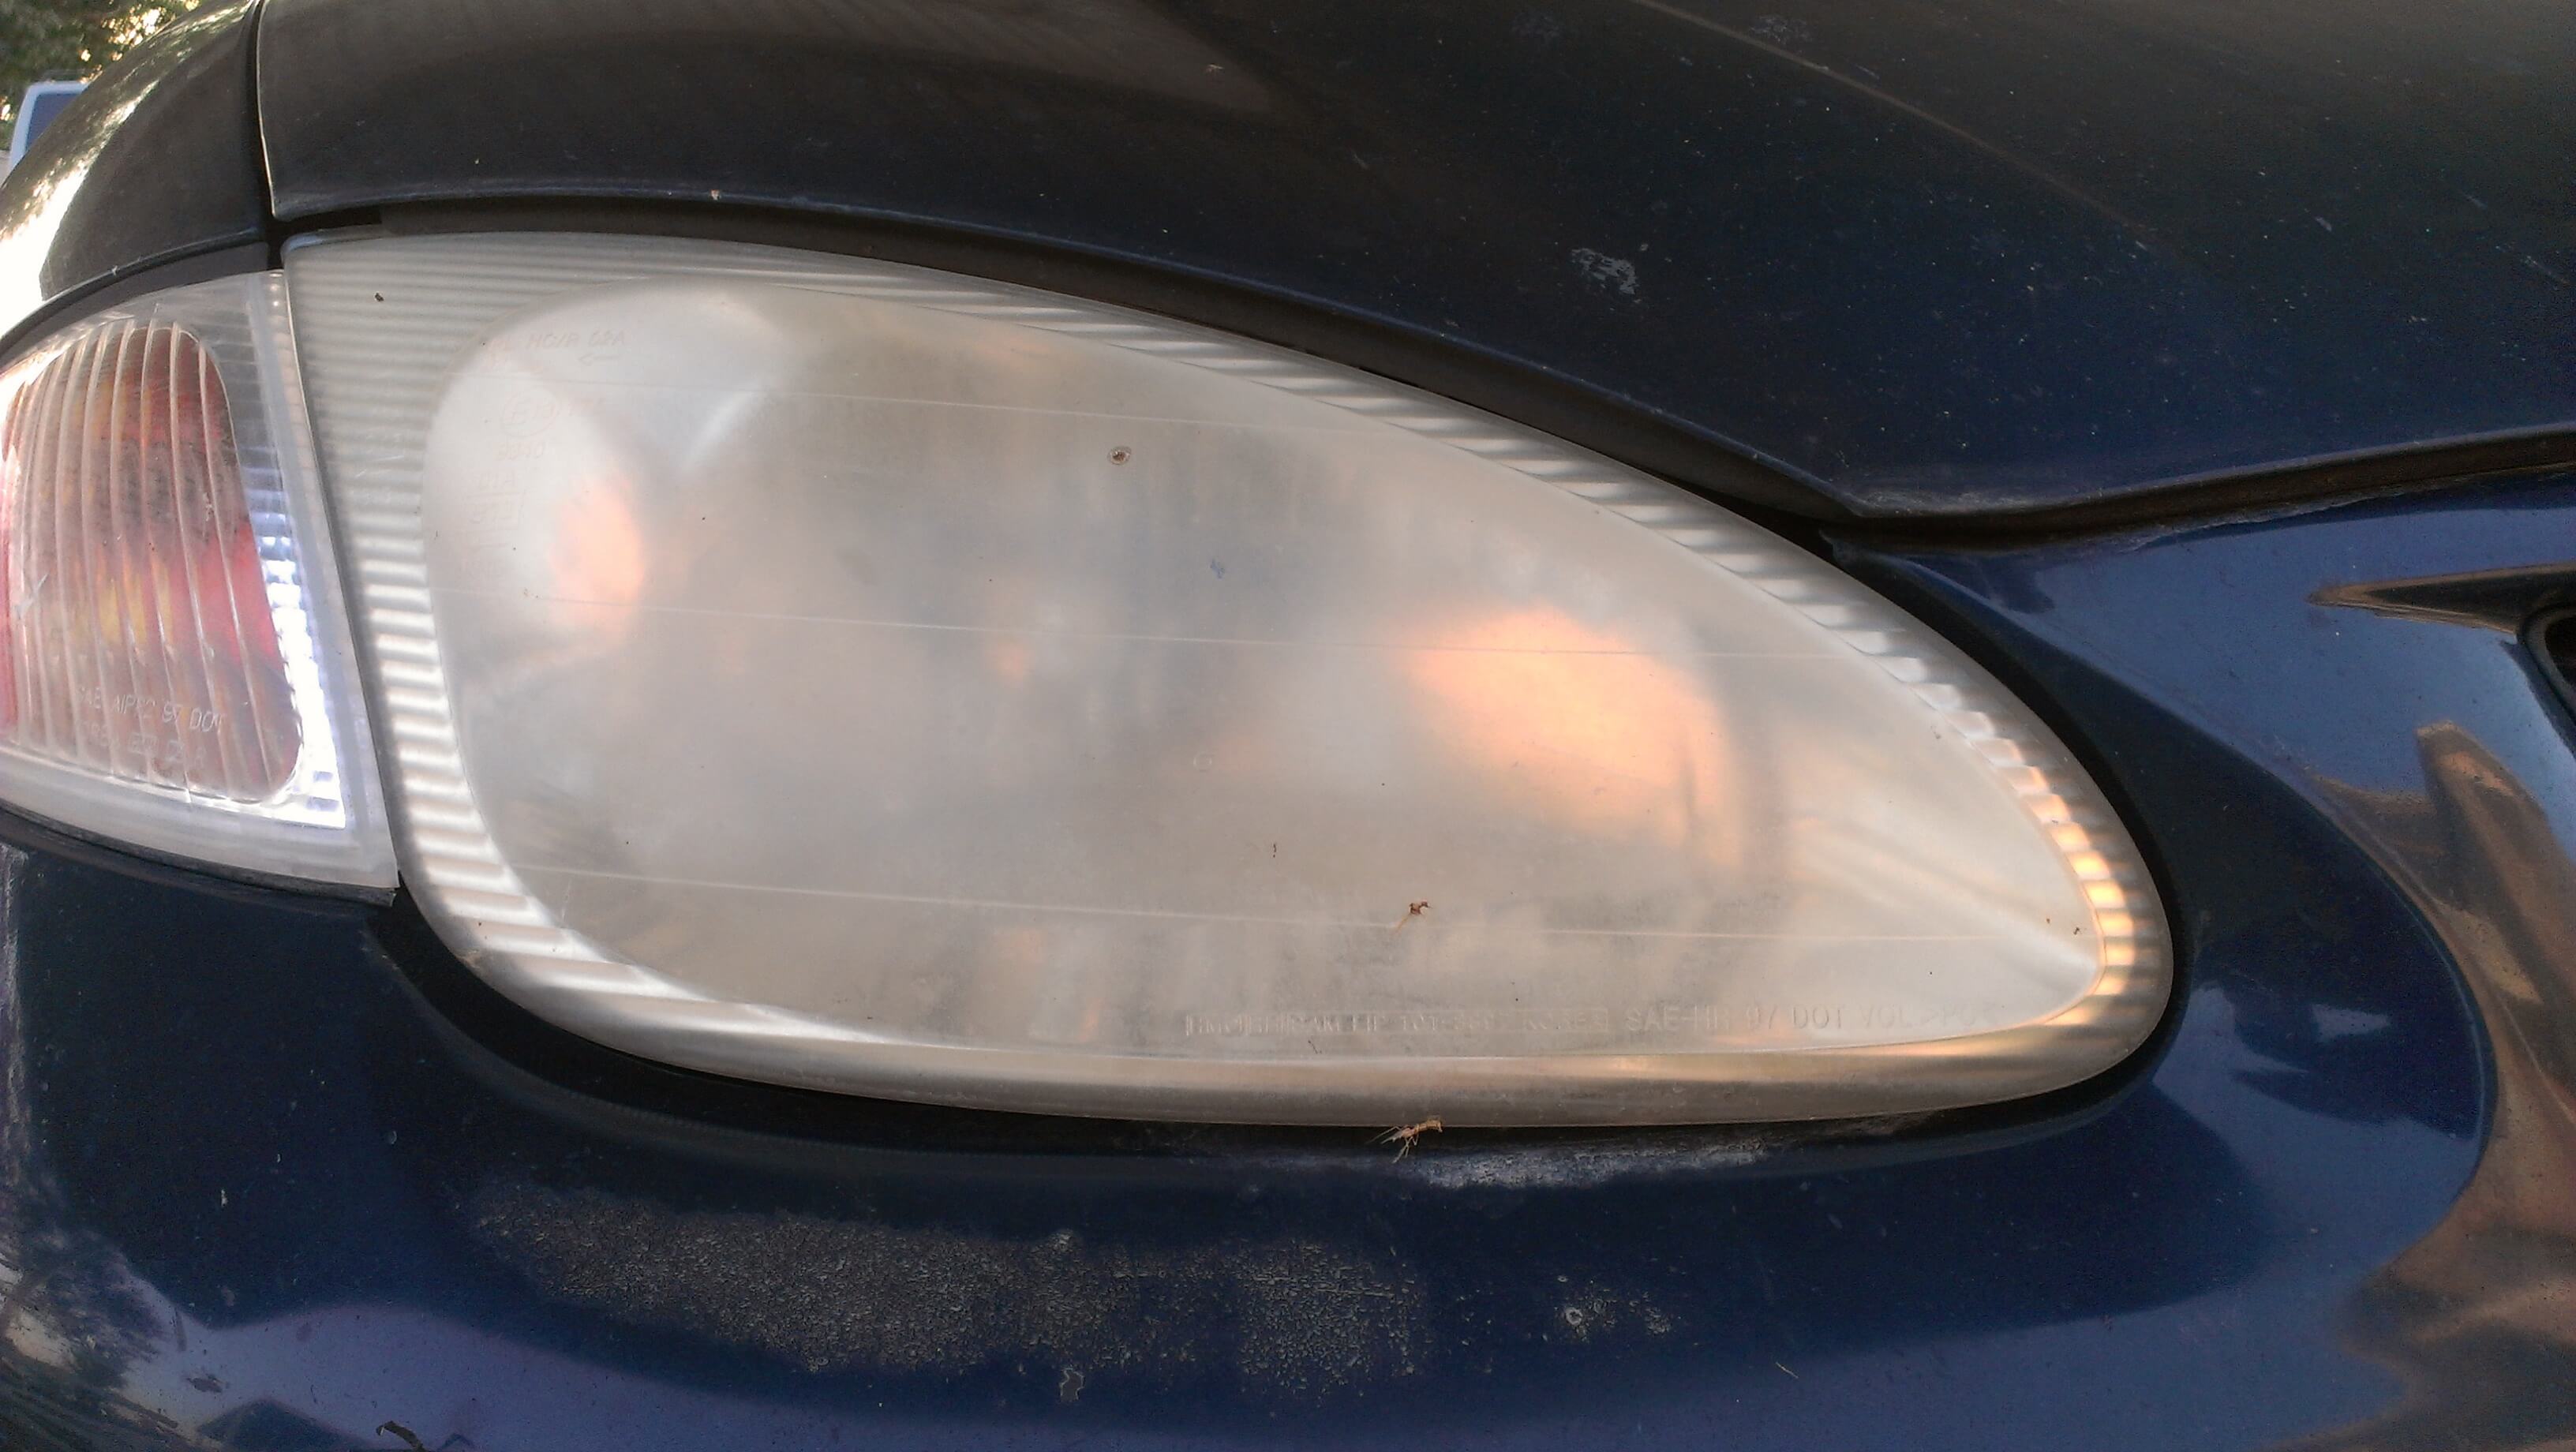 Cloudy Headlights Reduce Visibility, Increase Driving Risks